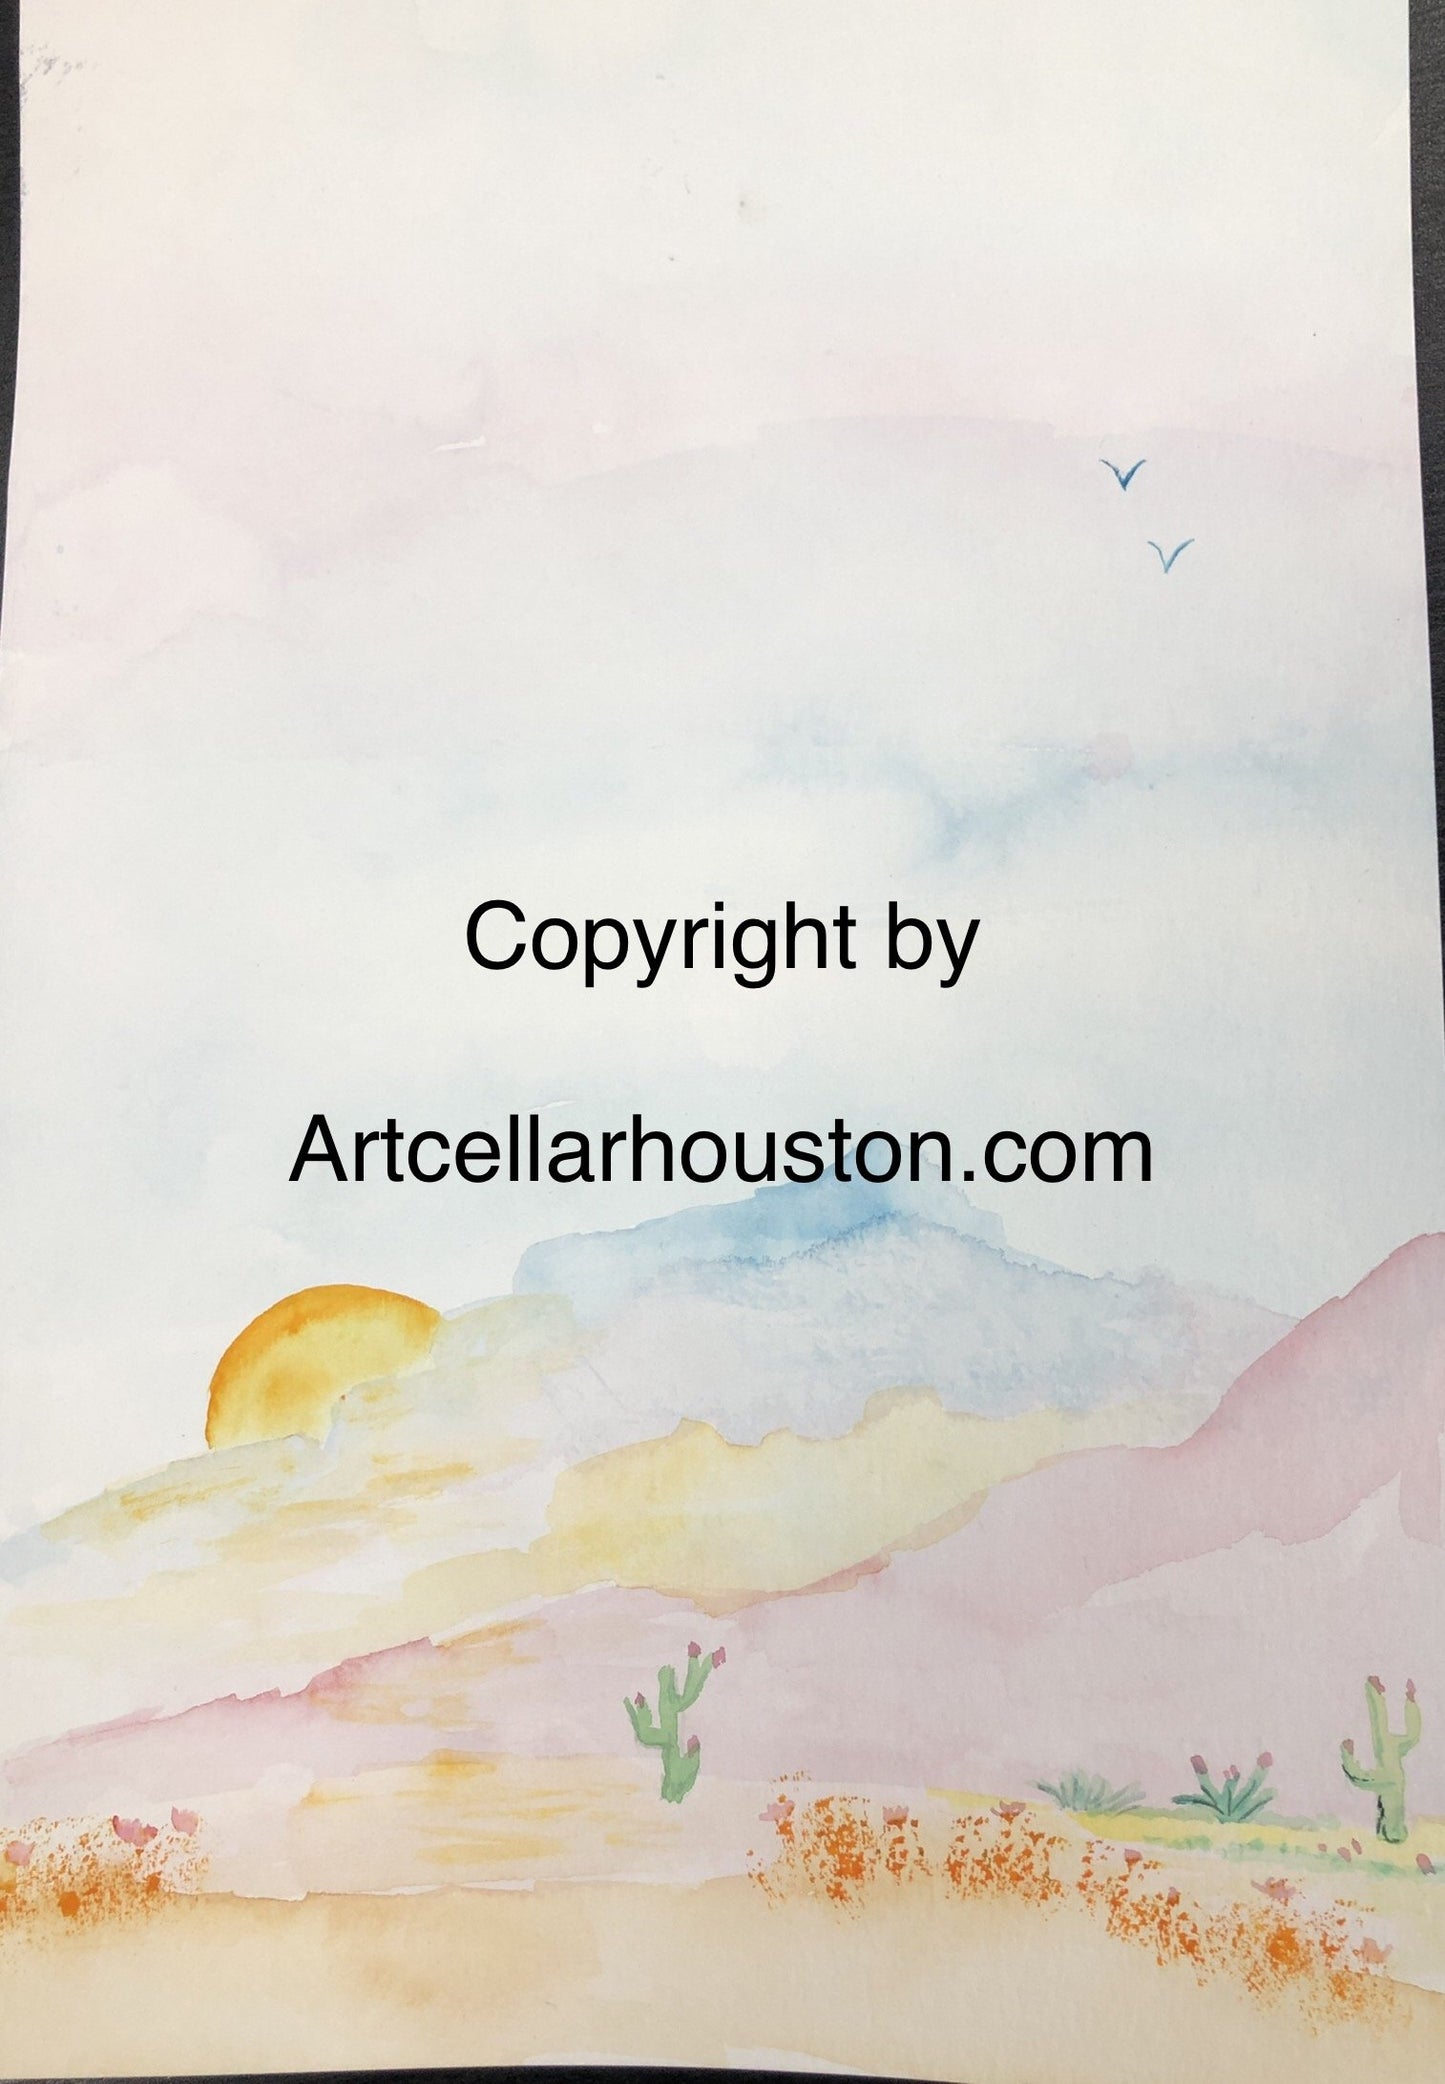 Wed, Sep 29, 4-6p Kids Paint: Fall Trees Public Houston Watercolor Painting